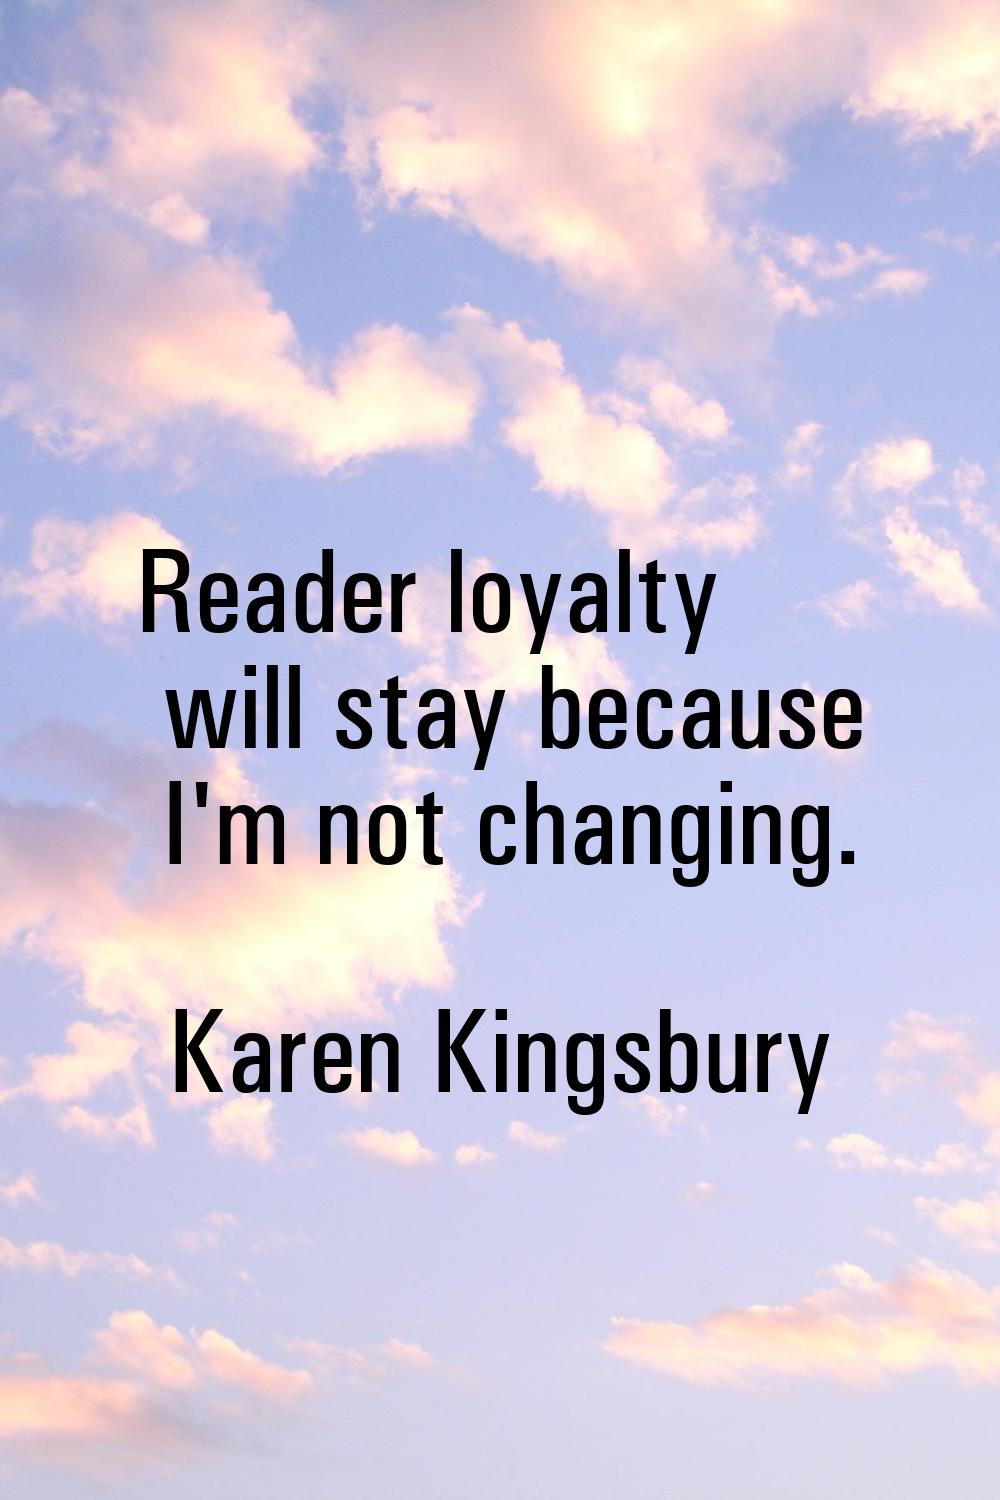 Reader loyalty will stay because I'm not changing.